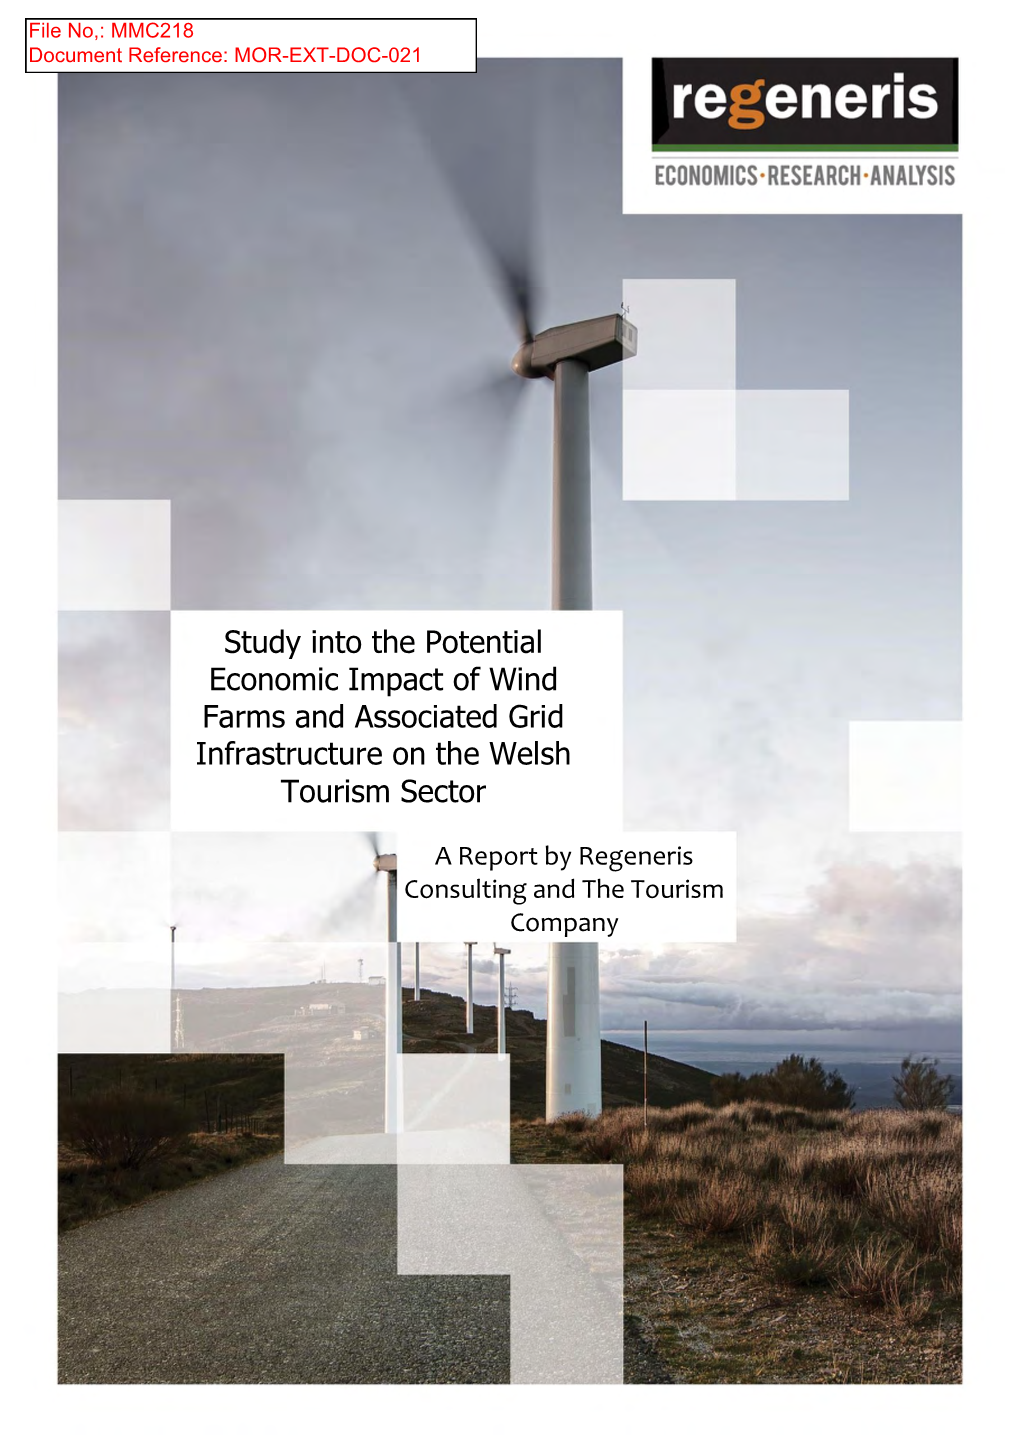 Study Into the Potential Economic Impact of Wind Farms and Associated Grid Infrastructure on the Welsh Tourism Sector